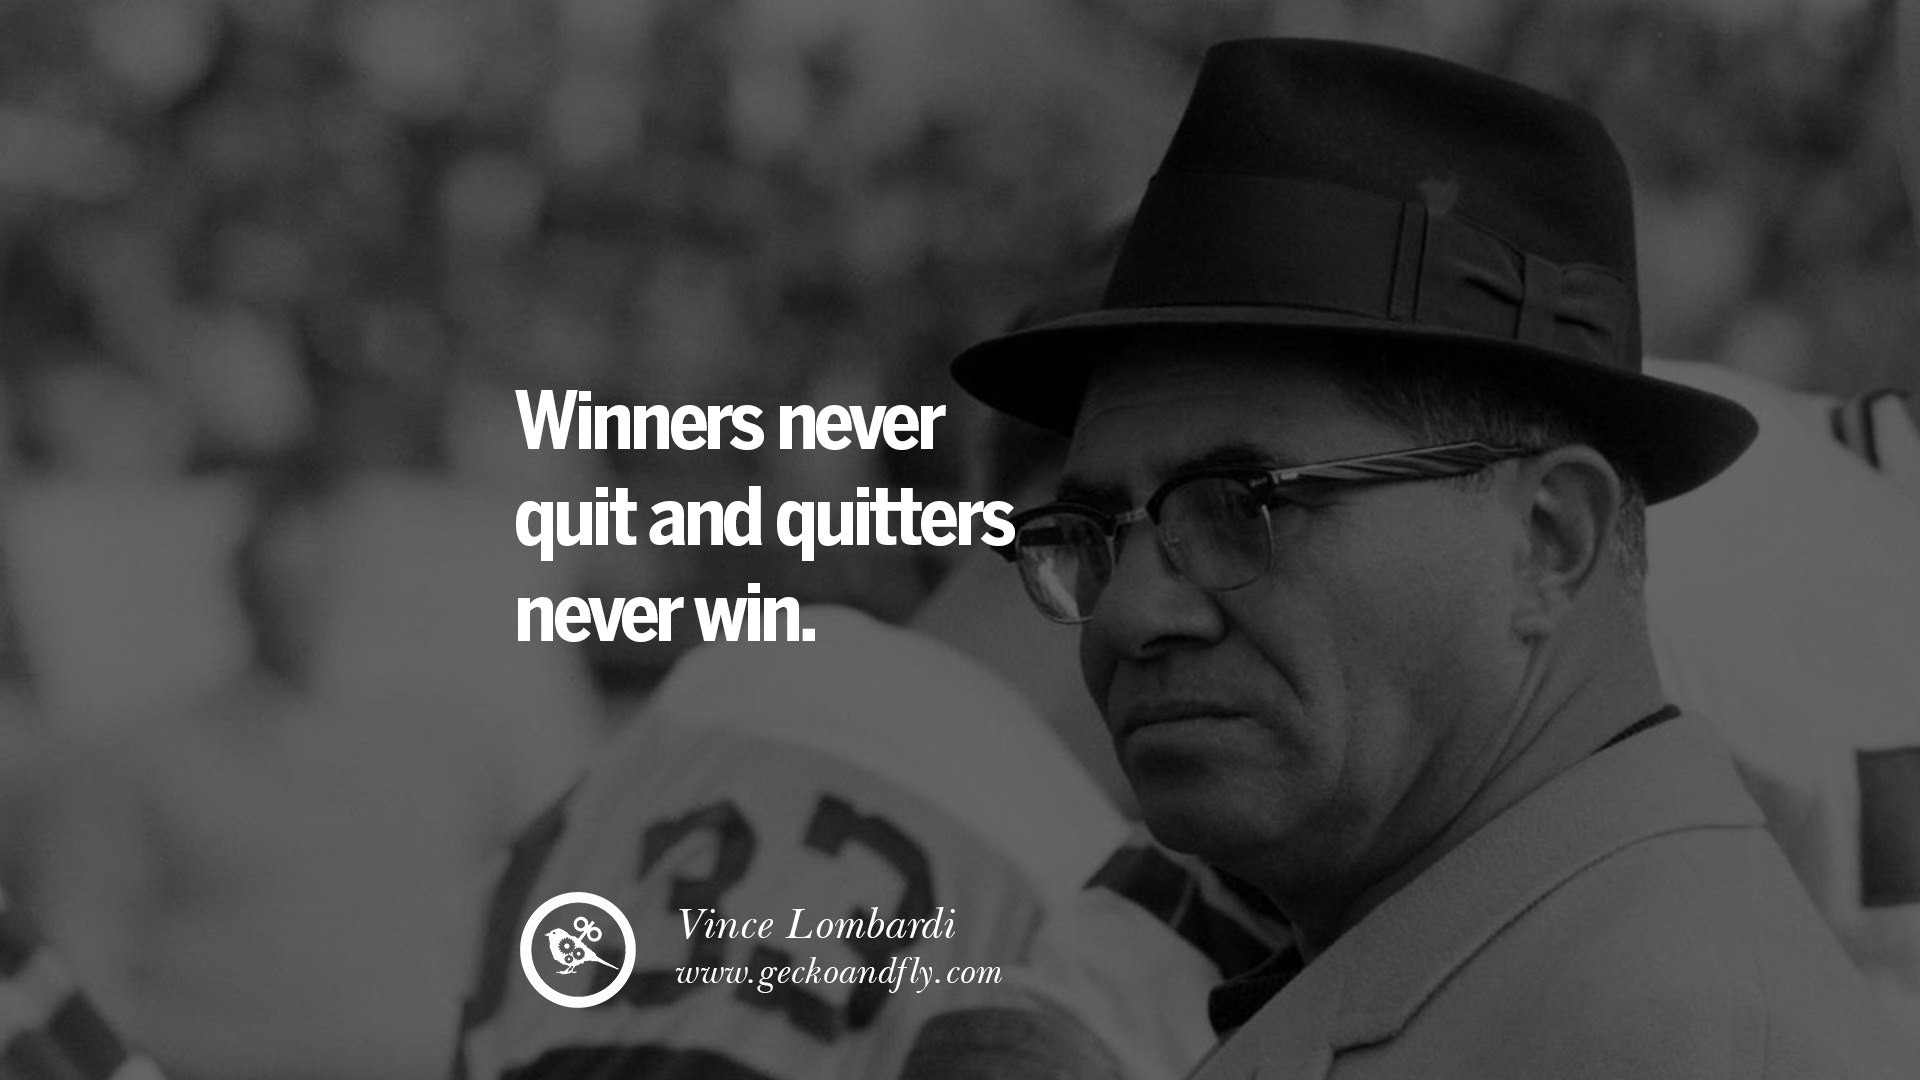 Vince Lombardi Leadership Quotes
 Vince Lombardi Leadership Quotes QuotesGram